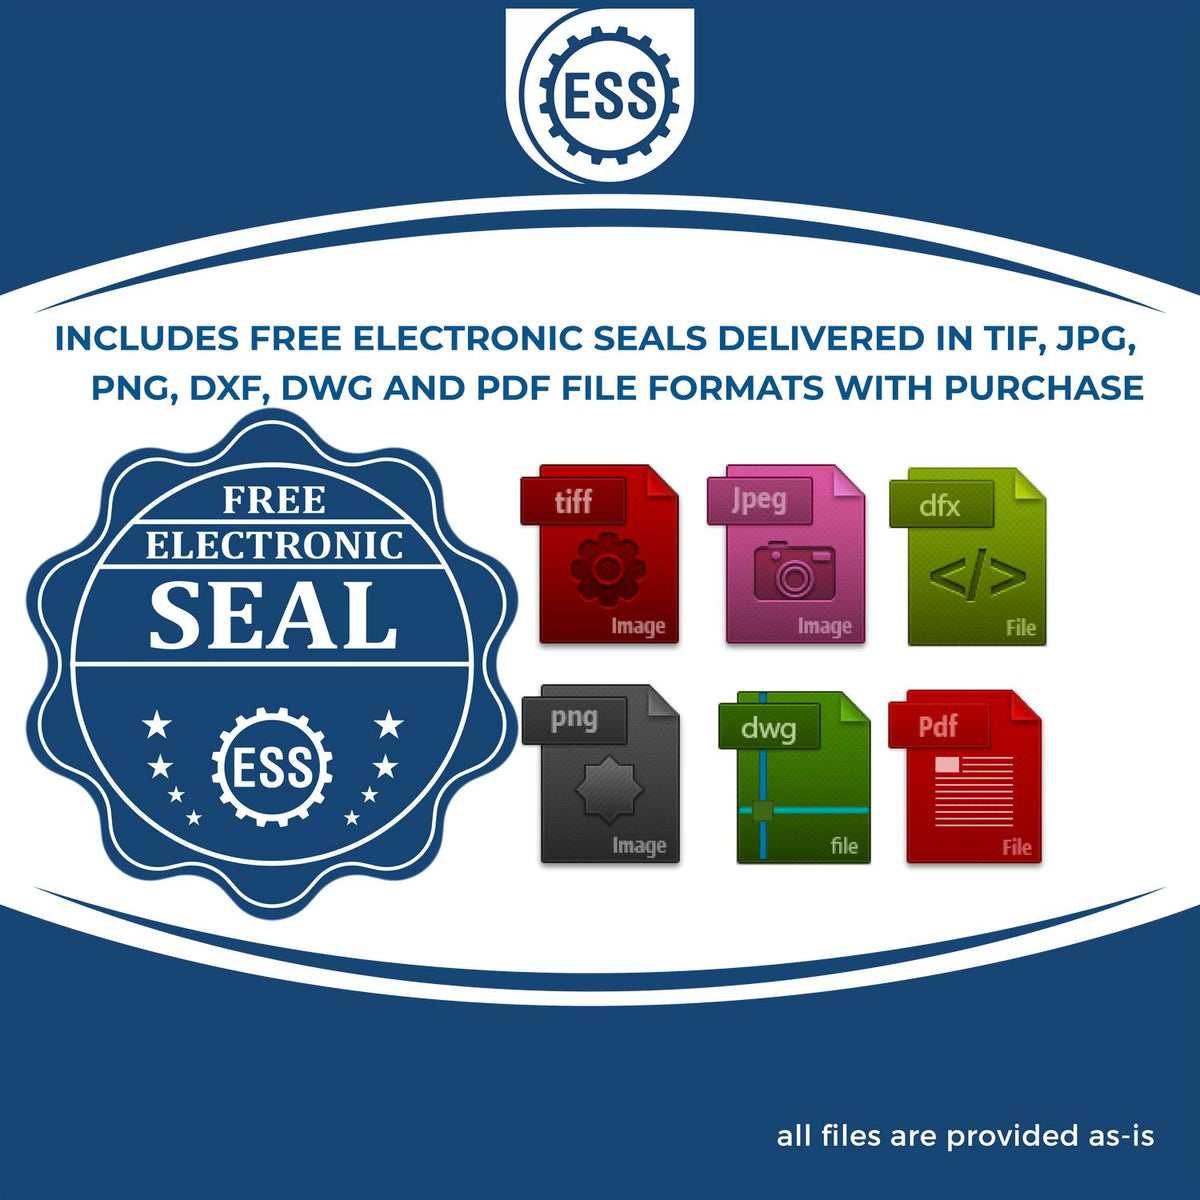 An infographic for the free electronic seal for the Self-Inking Illinois PE Stamp illustrating the different file type icons such as DXF, DWG, TIF, JPG and PNG.